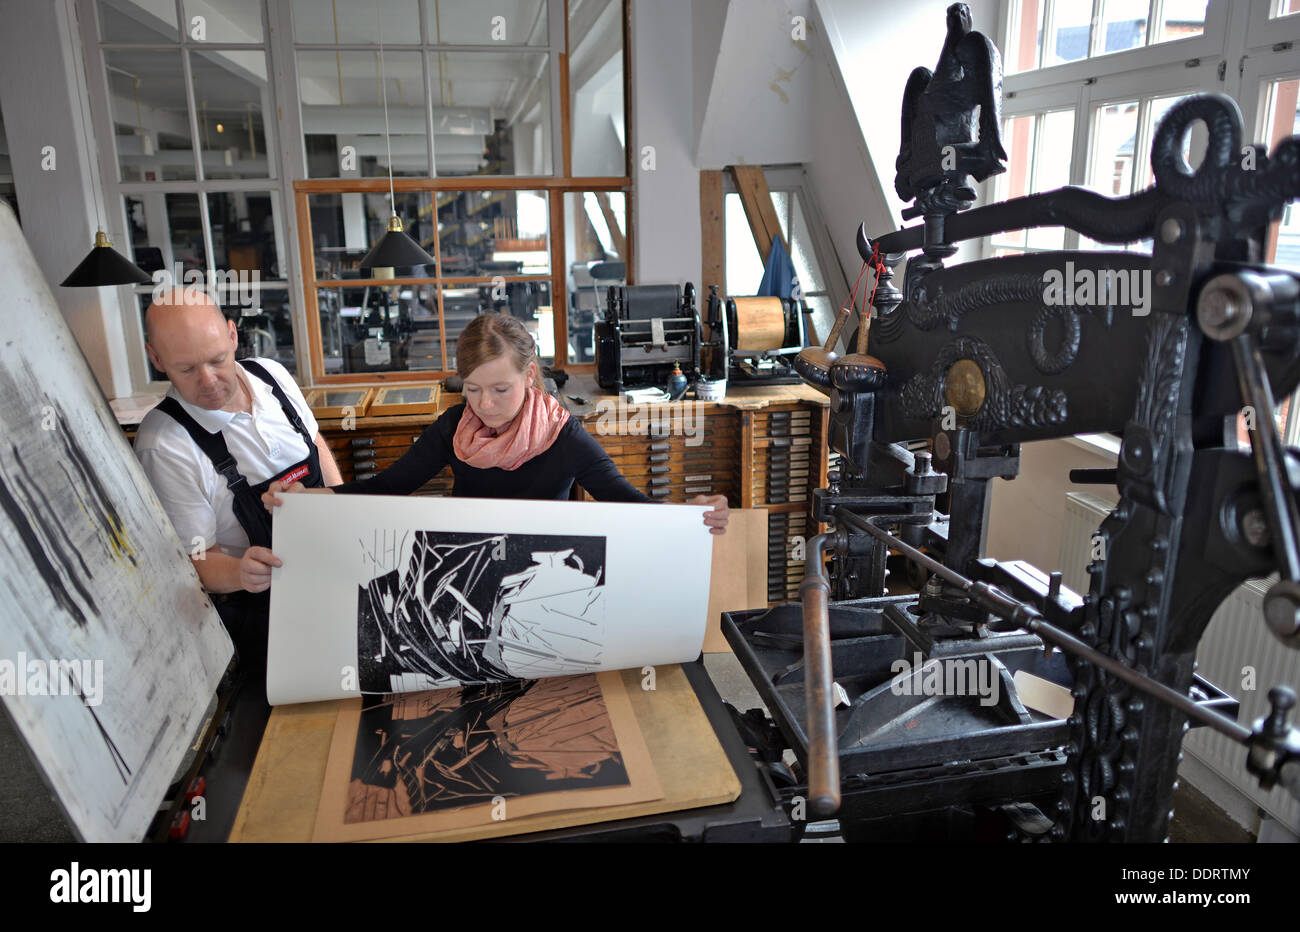 The artist Ellen Moeckel and the typesetter and museum employee, Thomas Kurz, print a linoleum cut on an English knuckle joint press in Leipzig, Germany, 04 September 2013. The 500-year-old historical print workshop and museum with about 100 working machines and presses presents its unique concept of being a producing workshop and a museum at the same time on the countrywide Heritage Open Day on 08 September 2013. Photo: HENDRIK SCHMIDT Stock Photo